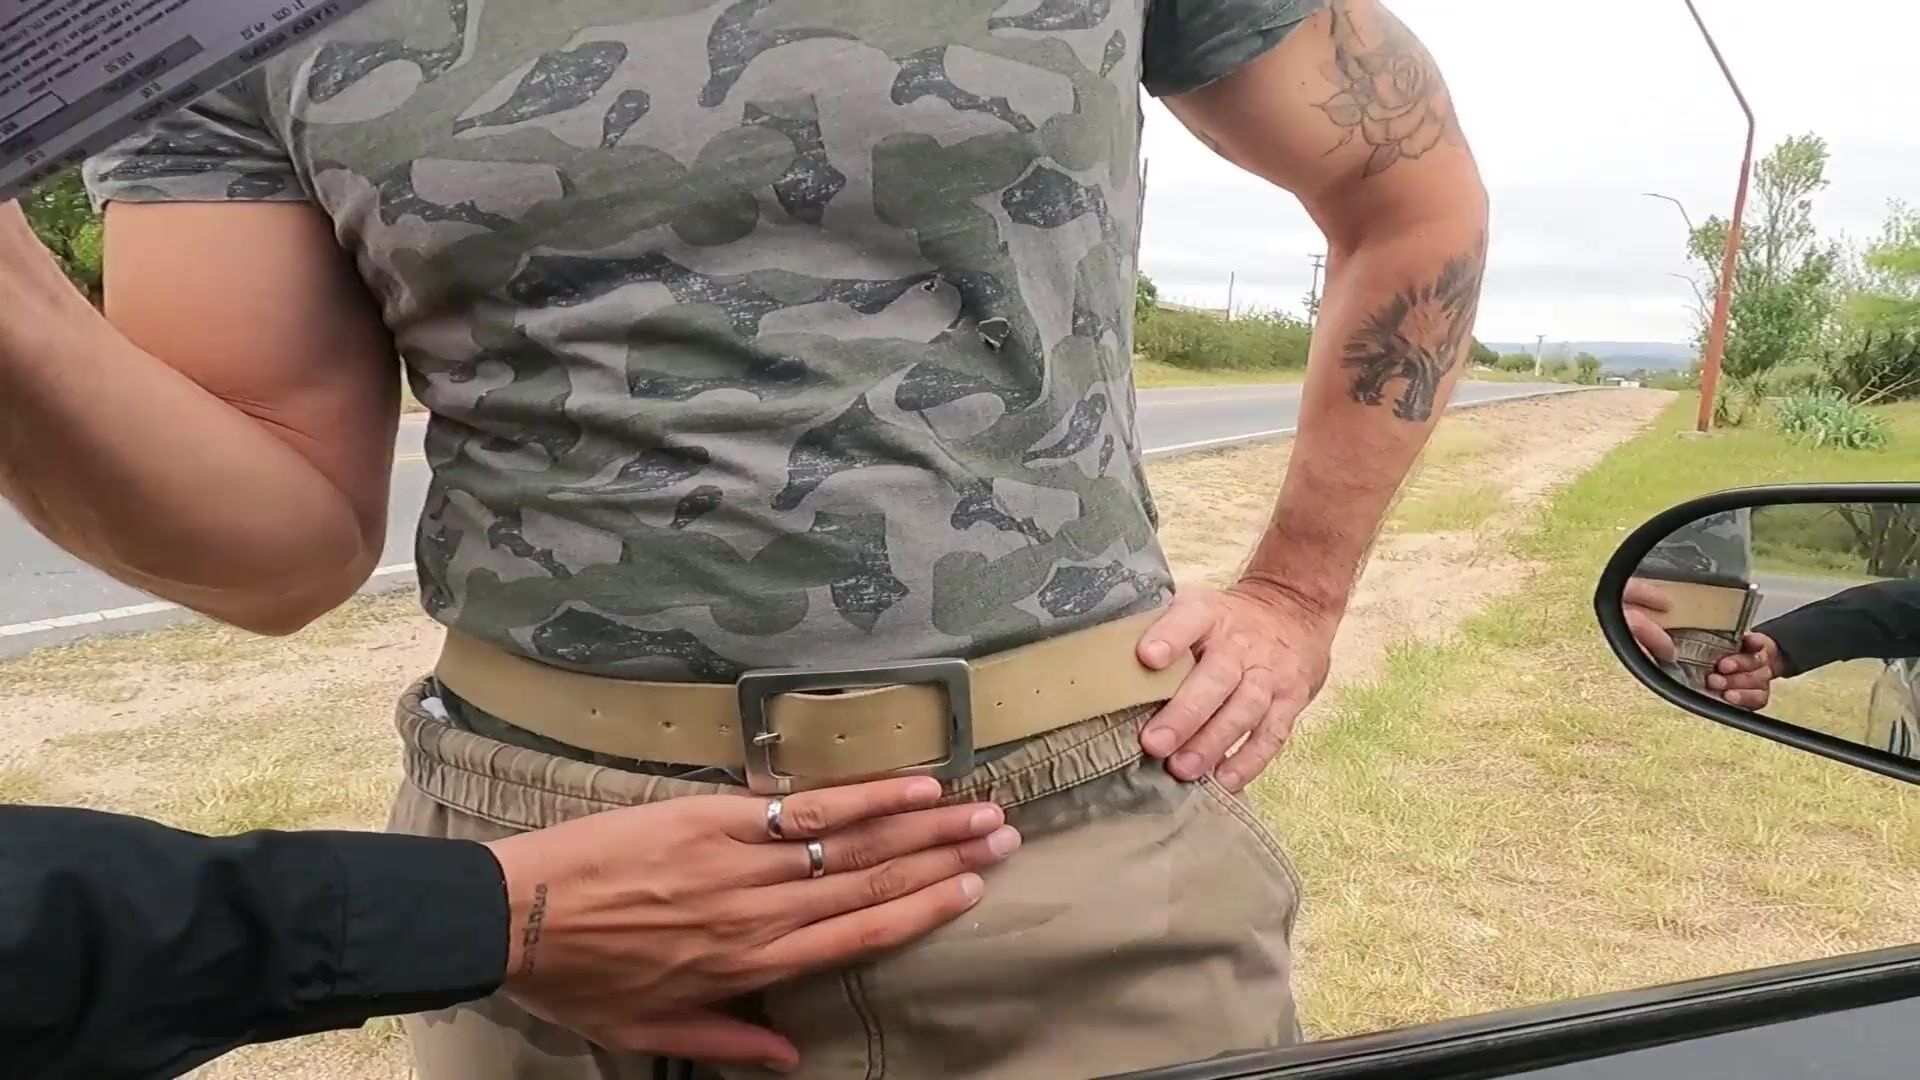 Bottom twinks bubble a-hole gives oral-sex bareback to military dude with a massive cock - homemade movie to pay a worthwhile - bottom bi-sexual outdoor sex giant cock image